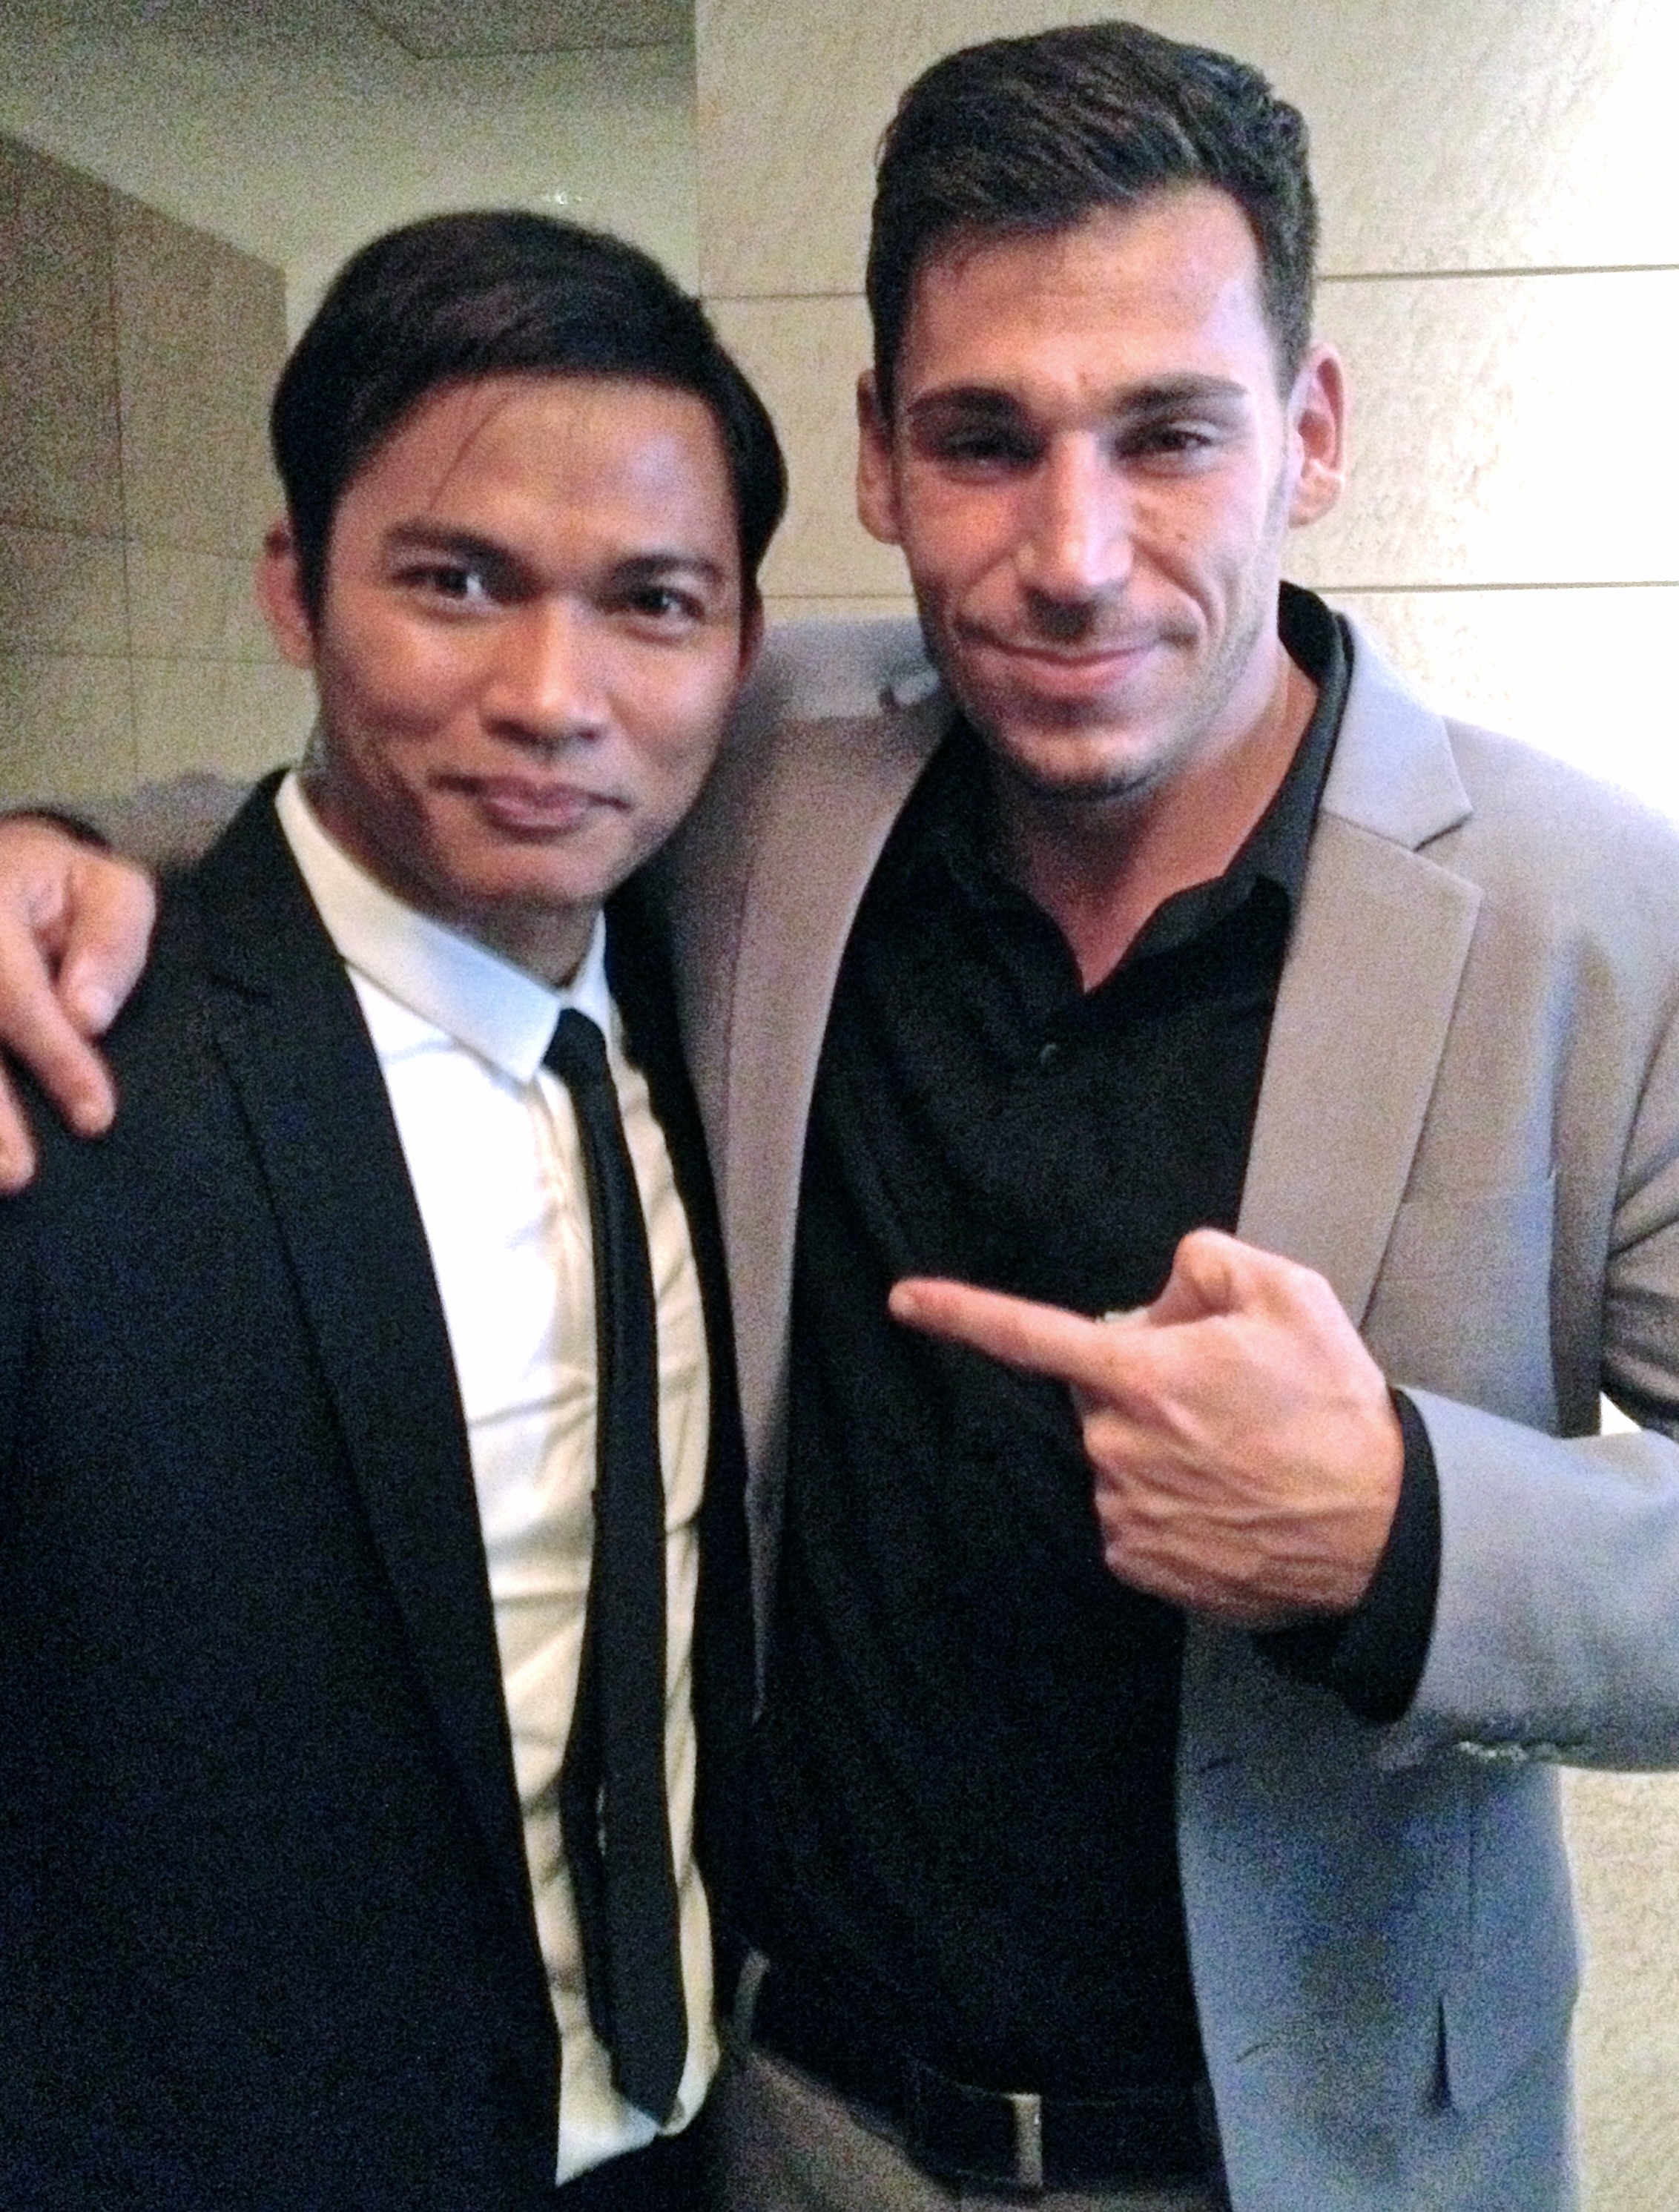 Picture Taken January 2014 Bangkok, On the set of 'Skin Trade', with Tony Jaa